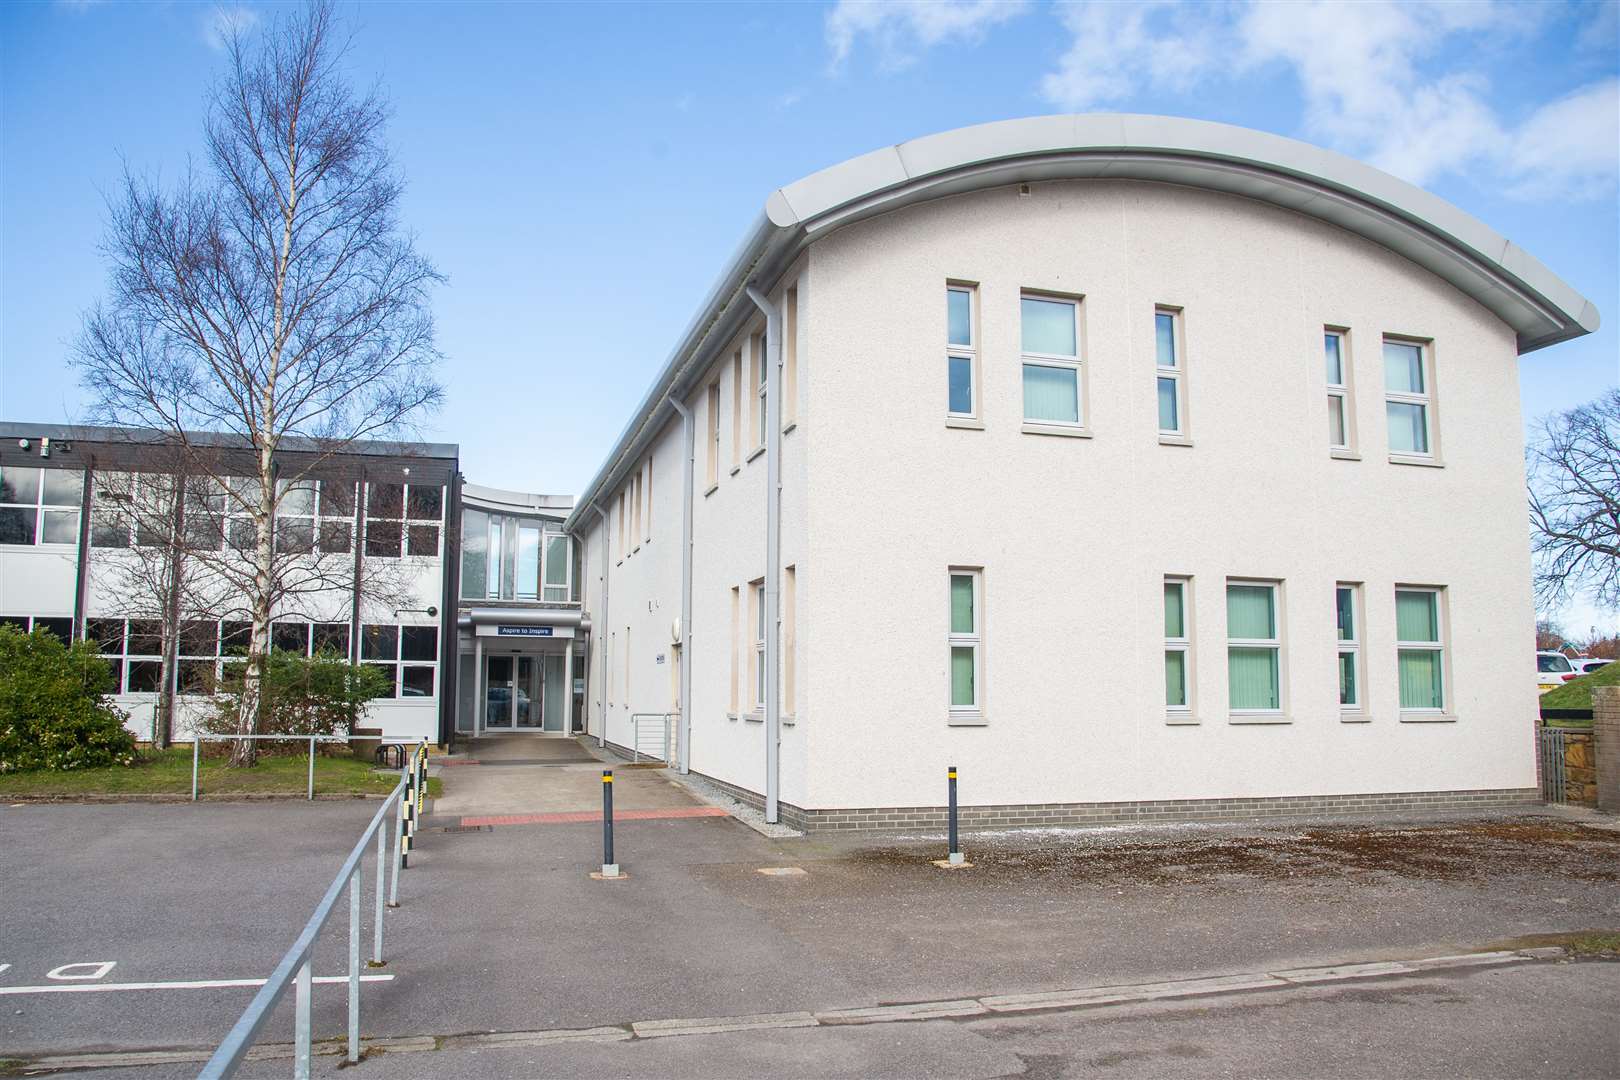 Forres Academy will see improvements to its heating, water supply and drainage.